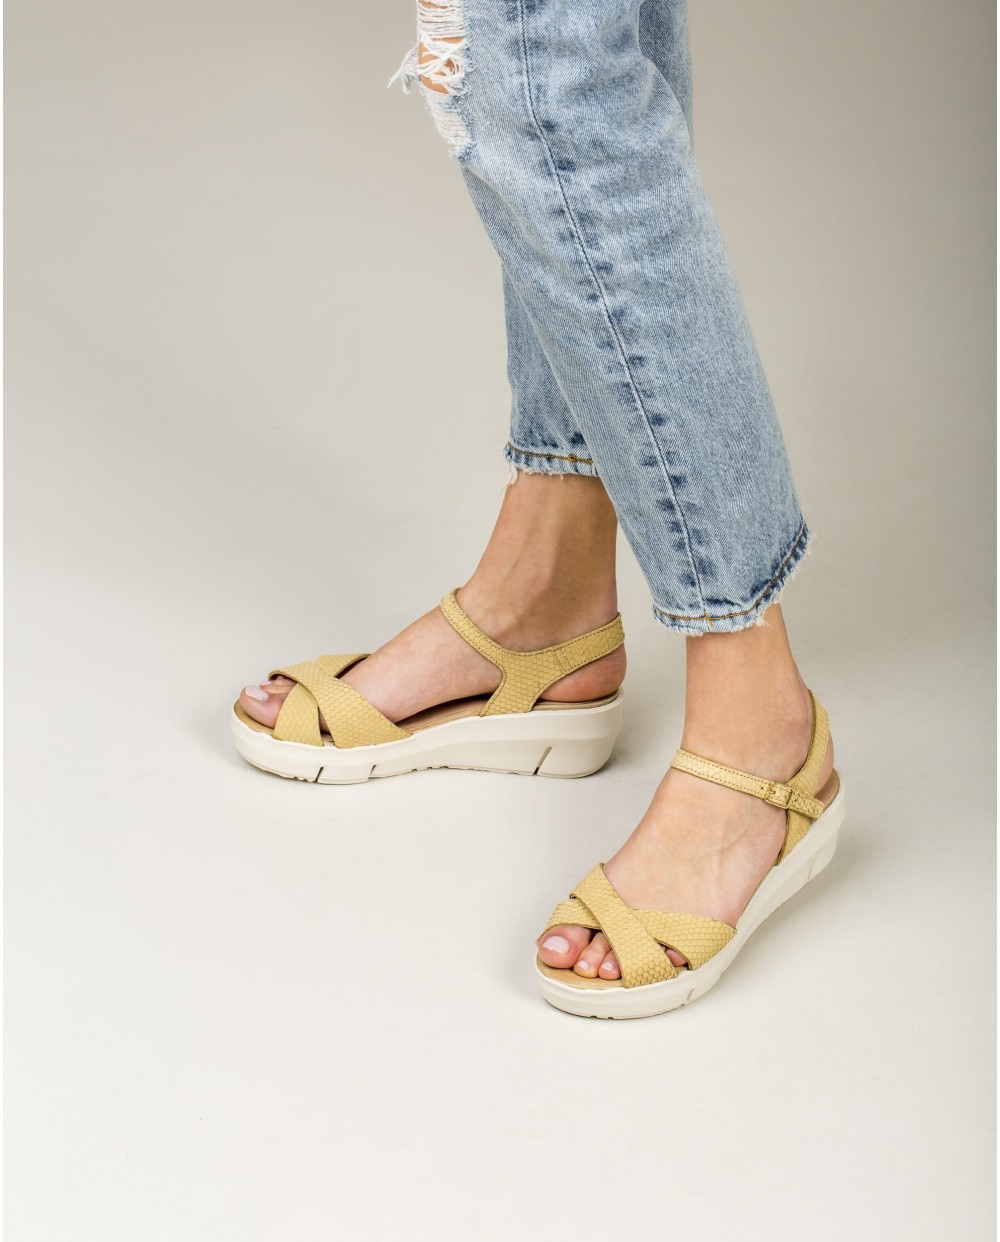 Wonders-Outlet-wedge sandal with criss cross straps